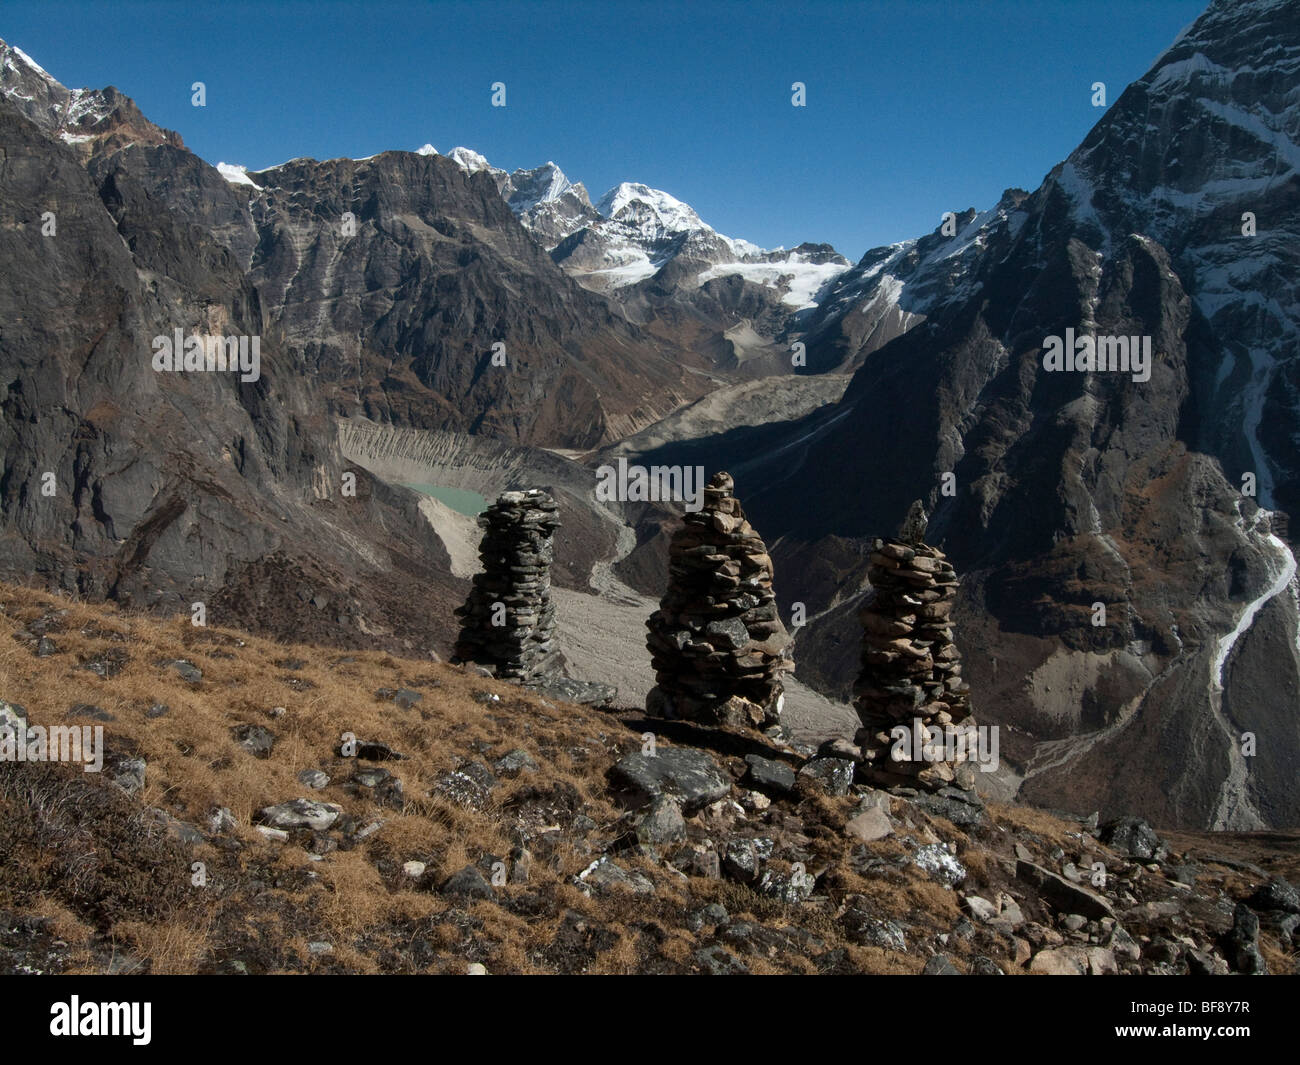 Mount Mera is the high peak in Mera National park. Cairns beside the path commemorate people who have passed that way. Nepal. Stock Photo